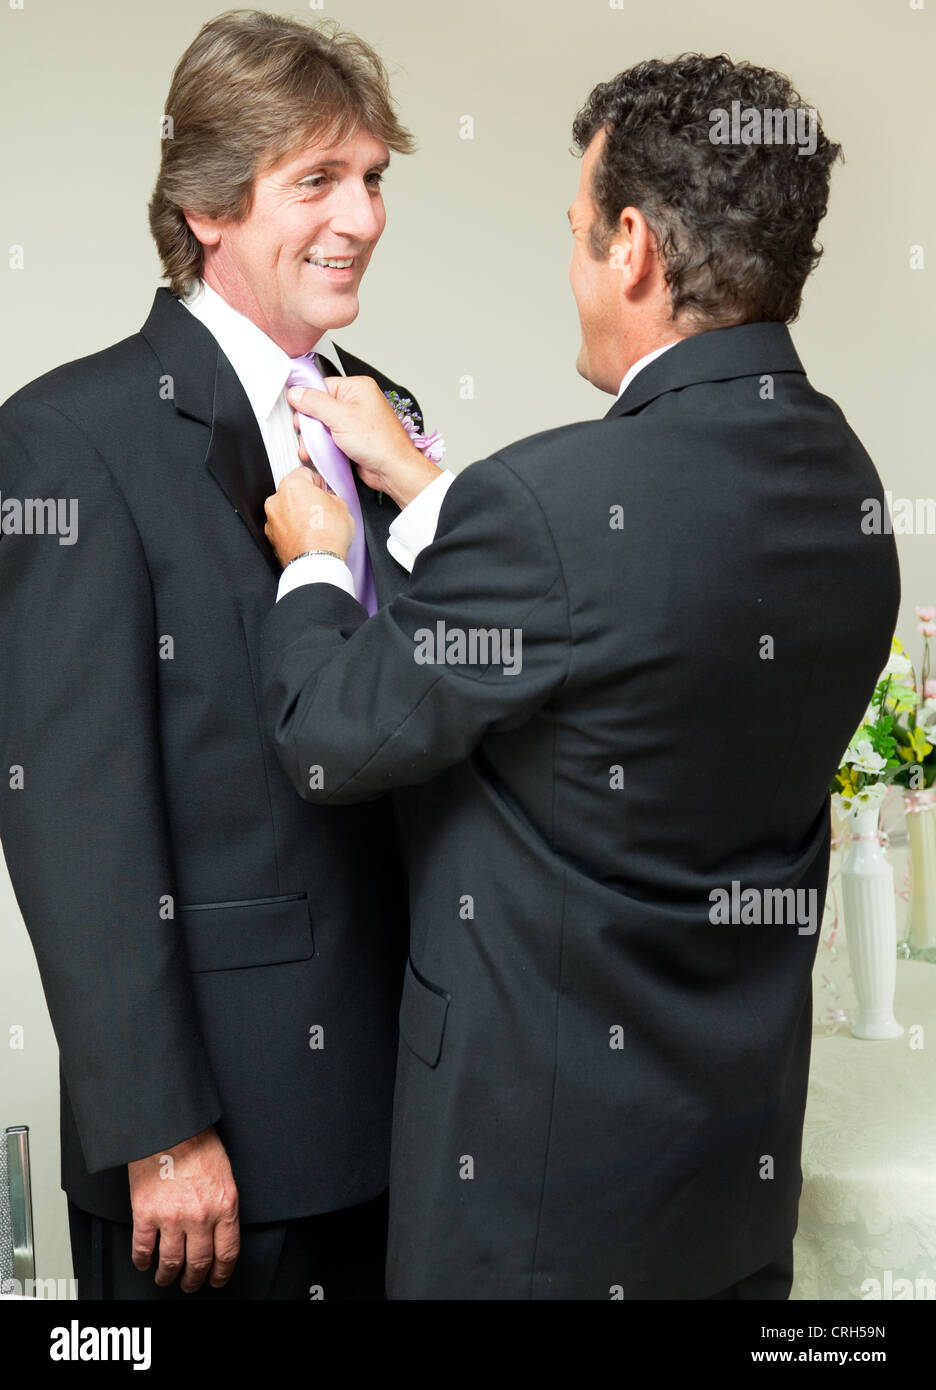 One groom straightens the other groom's tie at a gay marriage reception.  Stock Photo